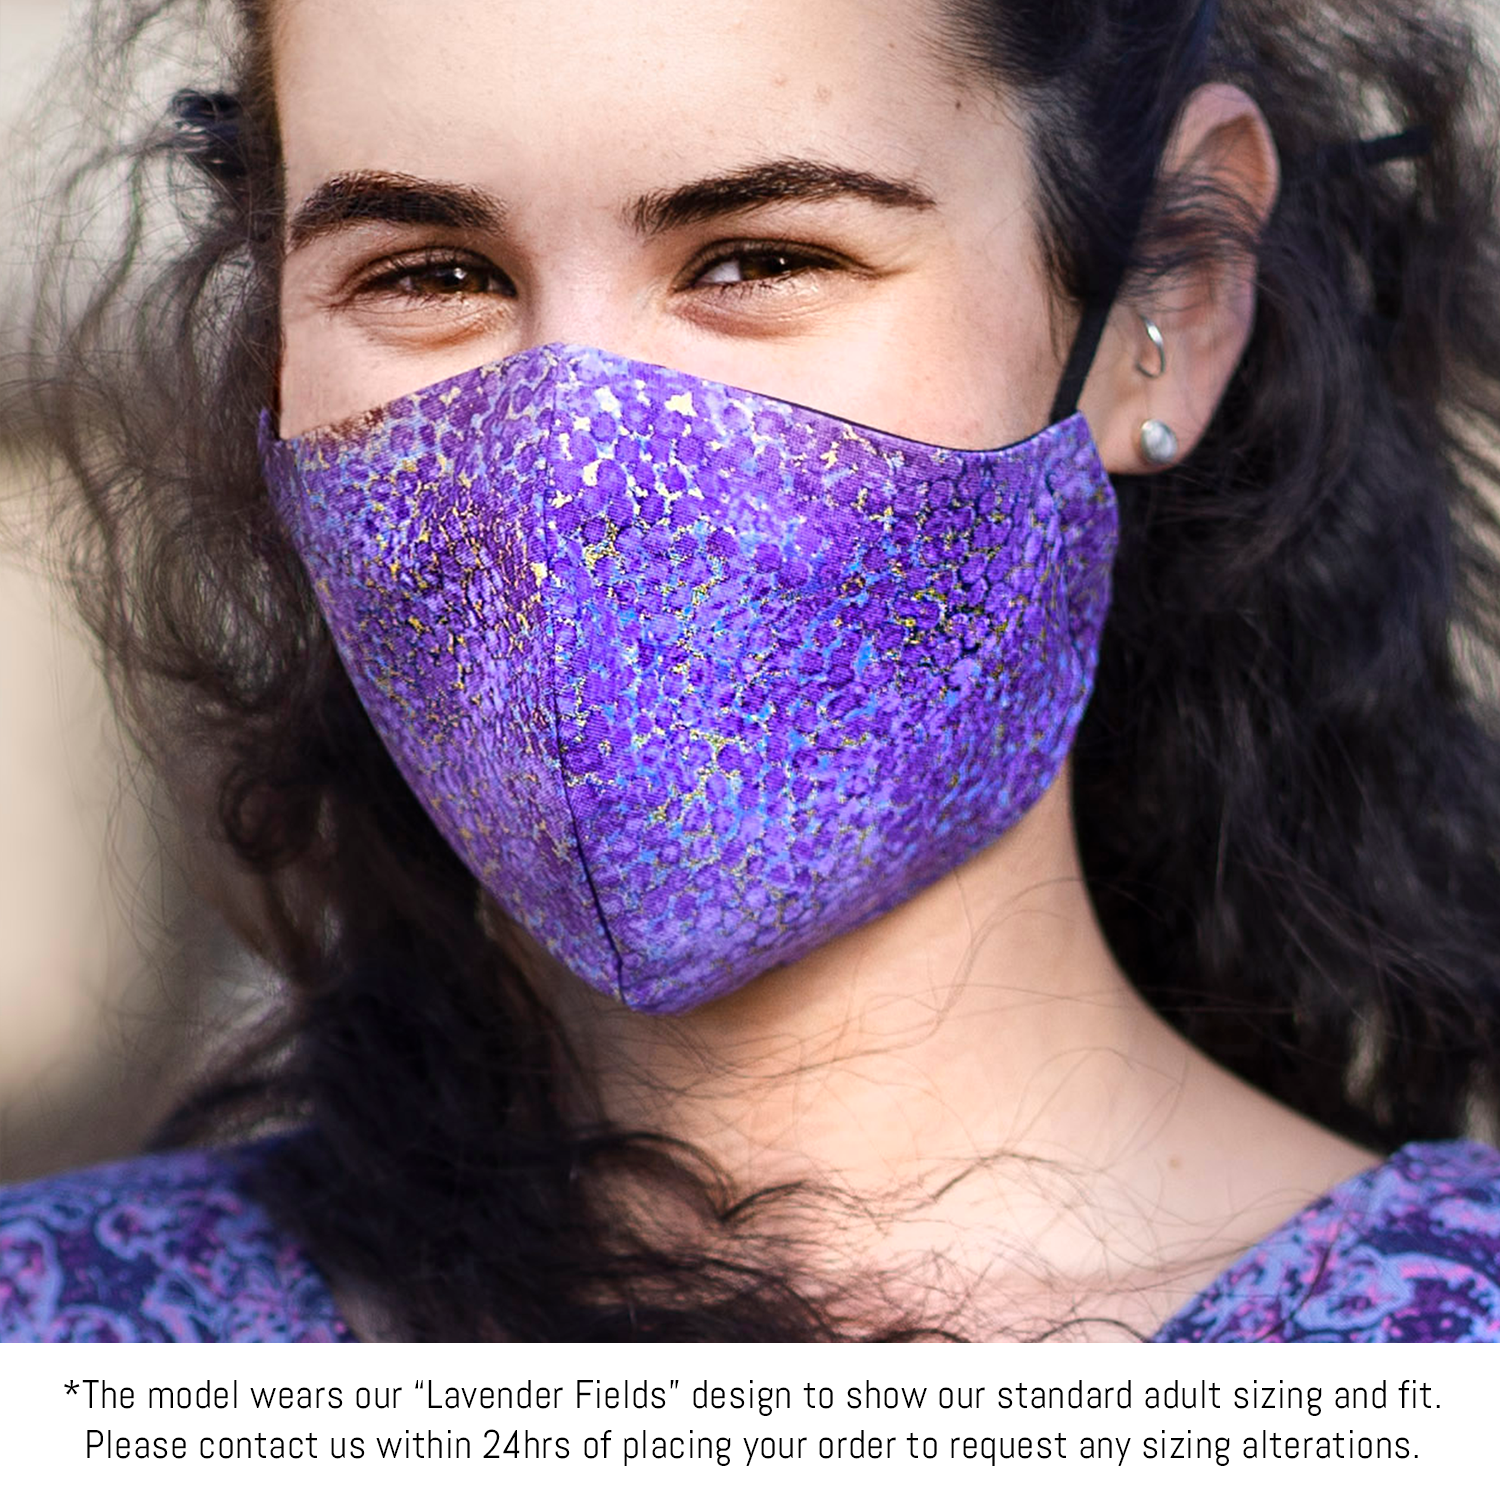 Triple layered face mask made in Melbourne Australia from cotton and poplin featuring a cool blue purple arrows digital print